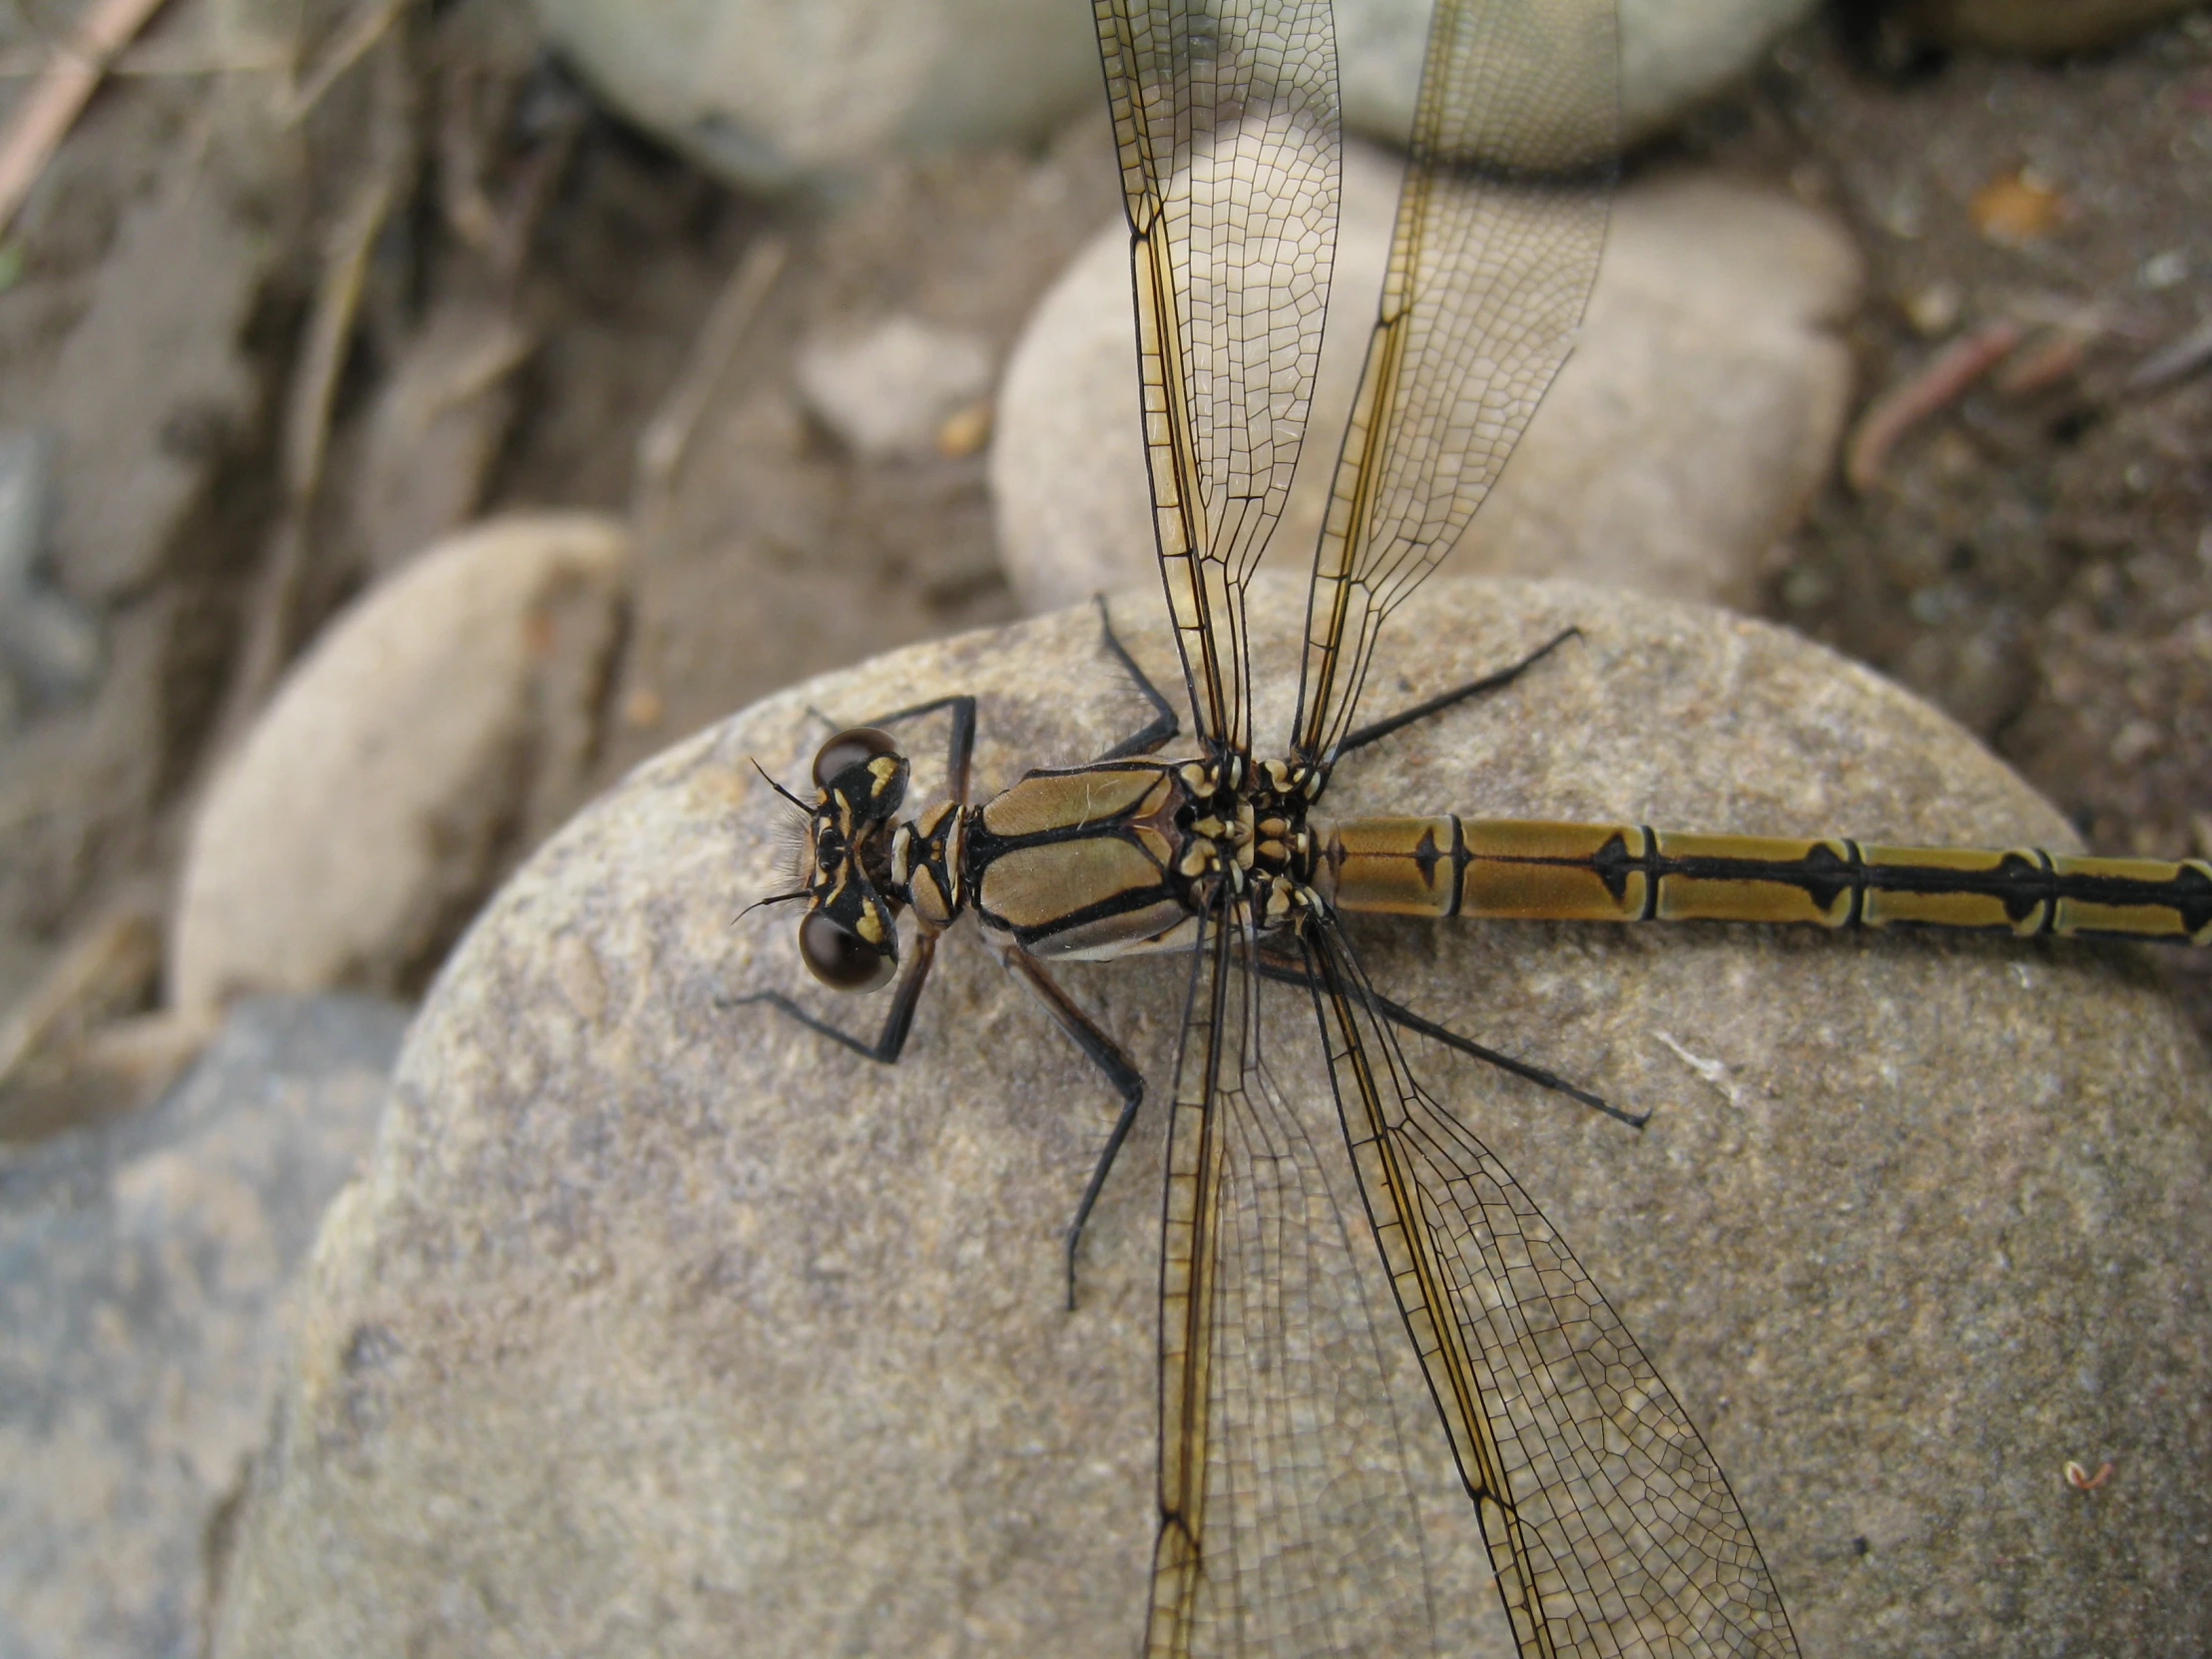 a close - up image of two dragonflies sitting on some rocks